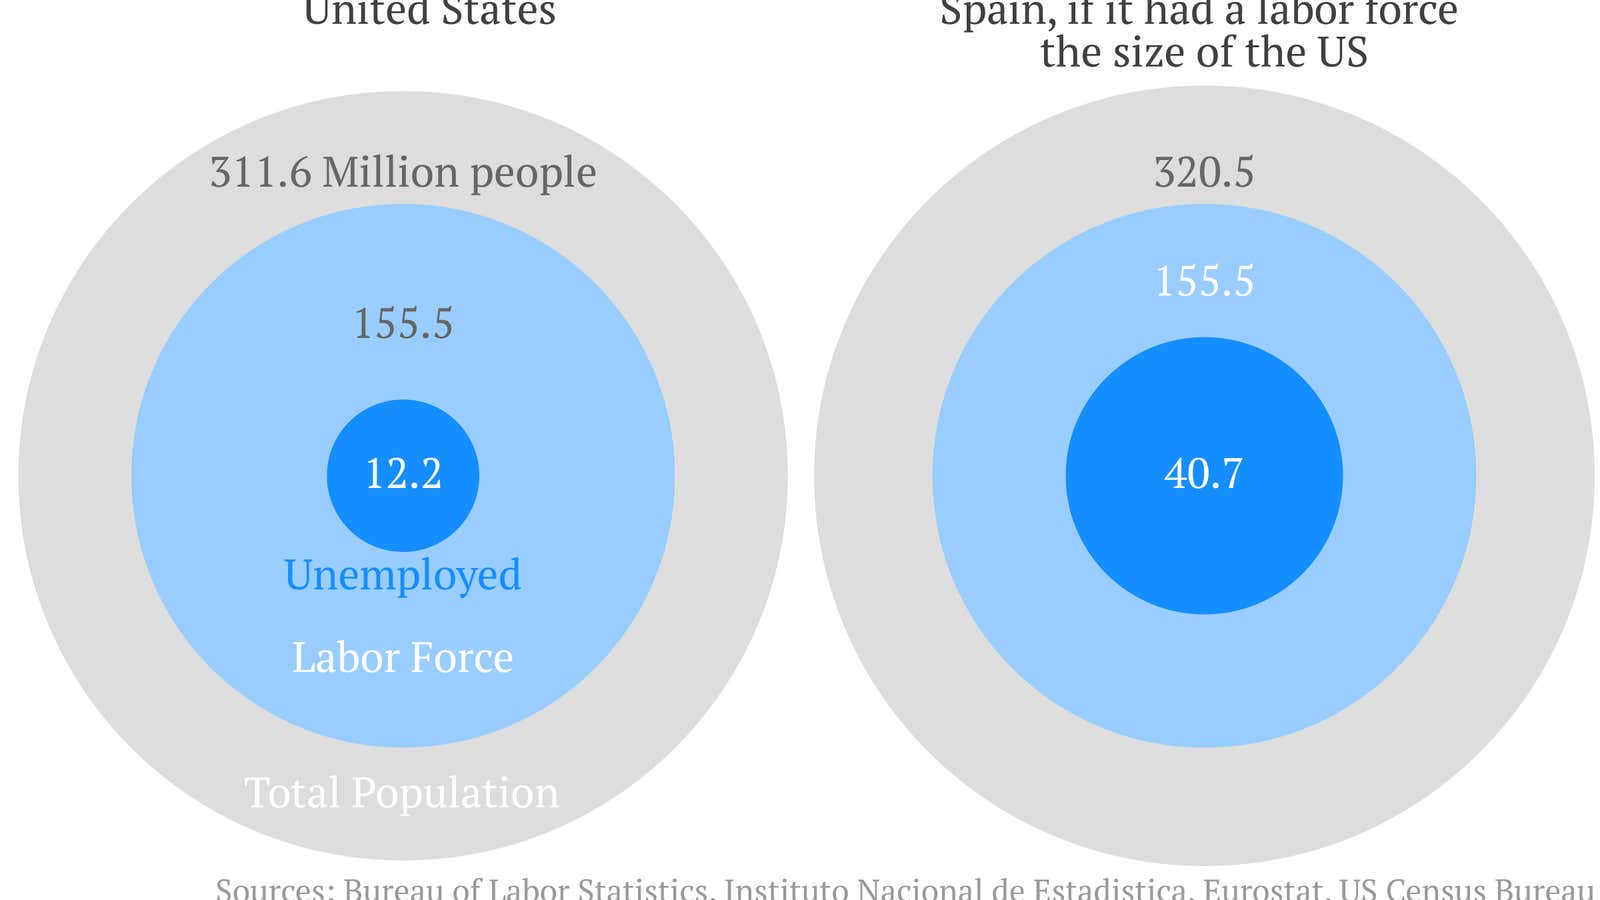 If Spain were the size of the US, it would have over 40 million unemployed